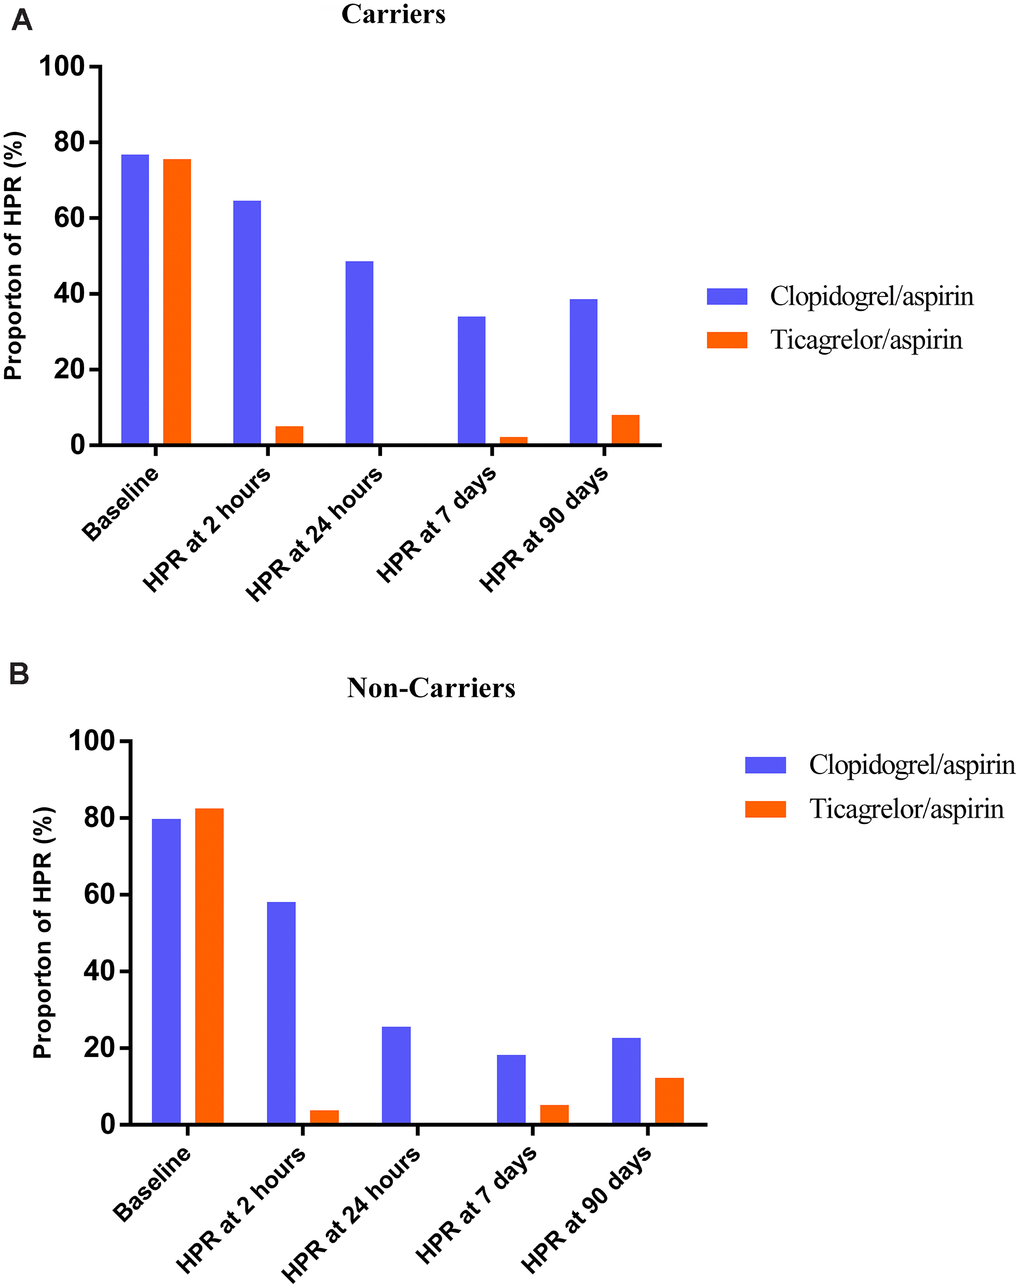 Effect of Ticagrelor/aspirin therapy compared with Clopidogrel/aspirin therapy on high on-treatment platelet reactivity (HOPR) during study time course stratified by metabolizer status. (A) Carriers; (B) Non-carriers.